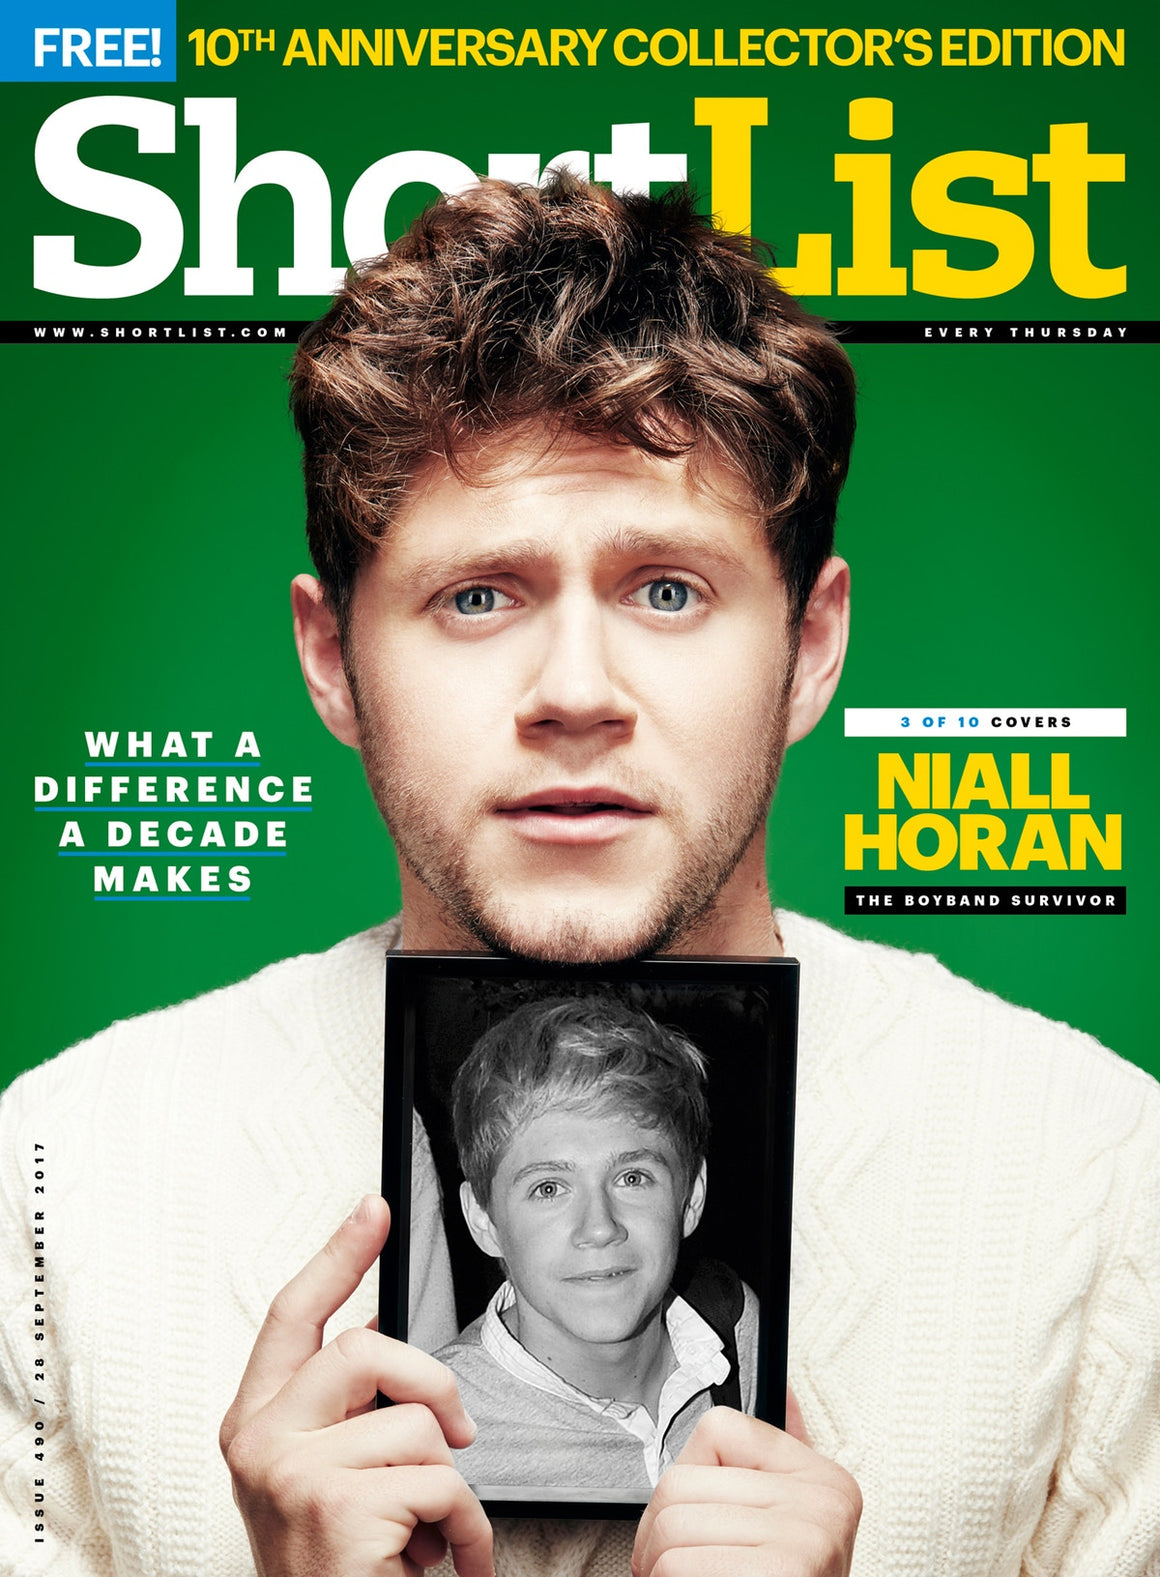 Niall Horan of One Direction on the cover of Shortlist Magazine